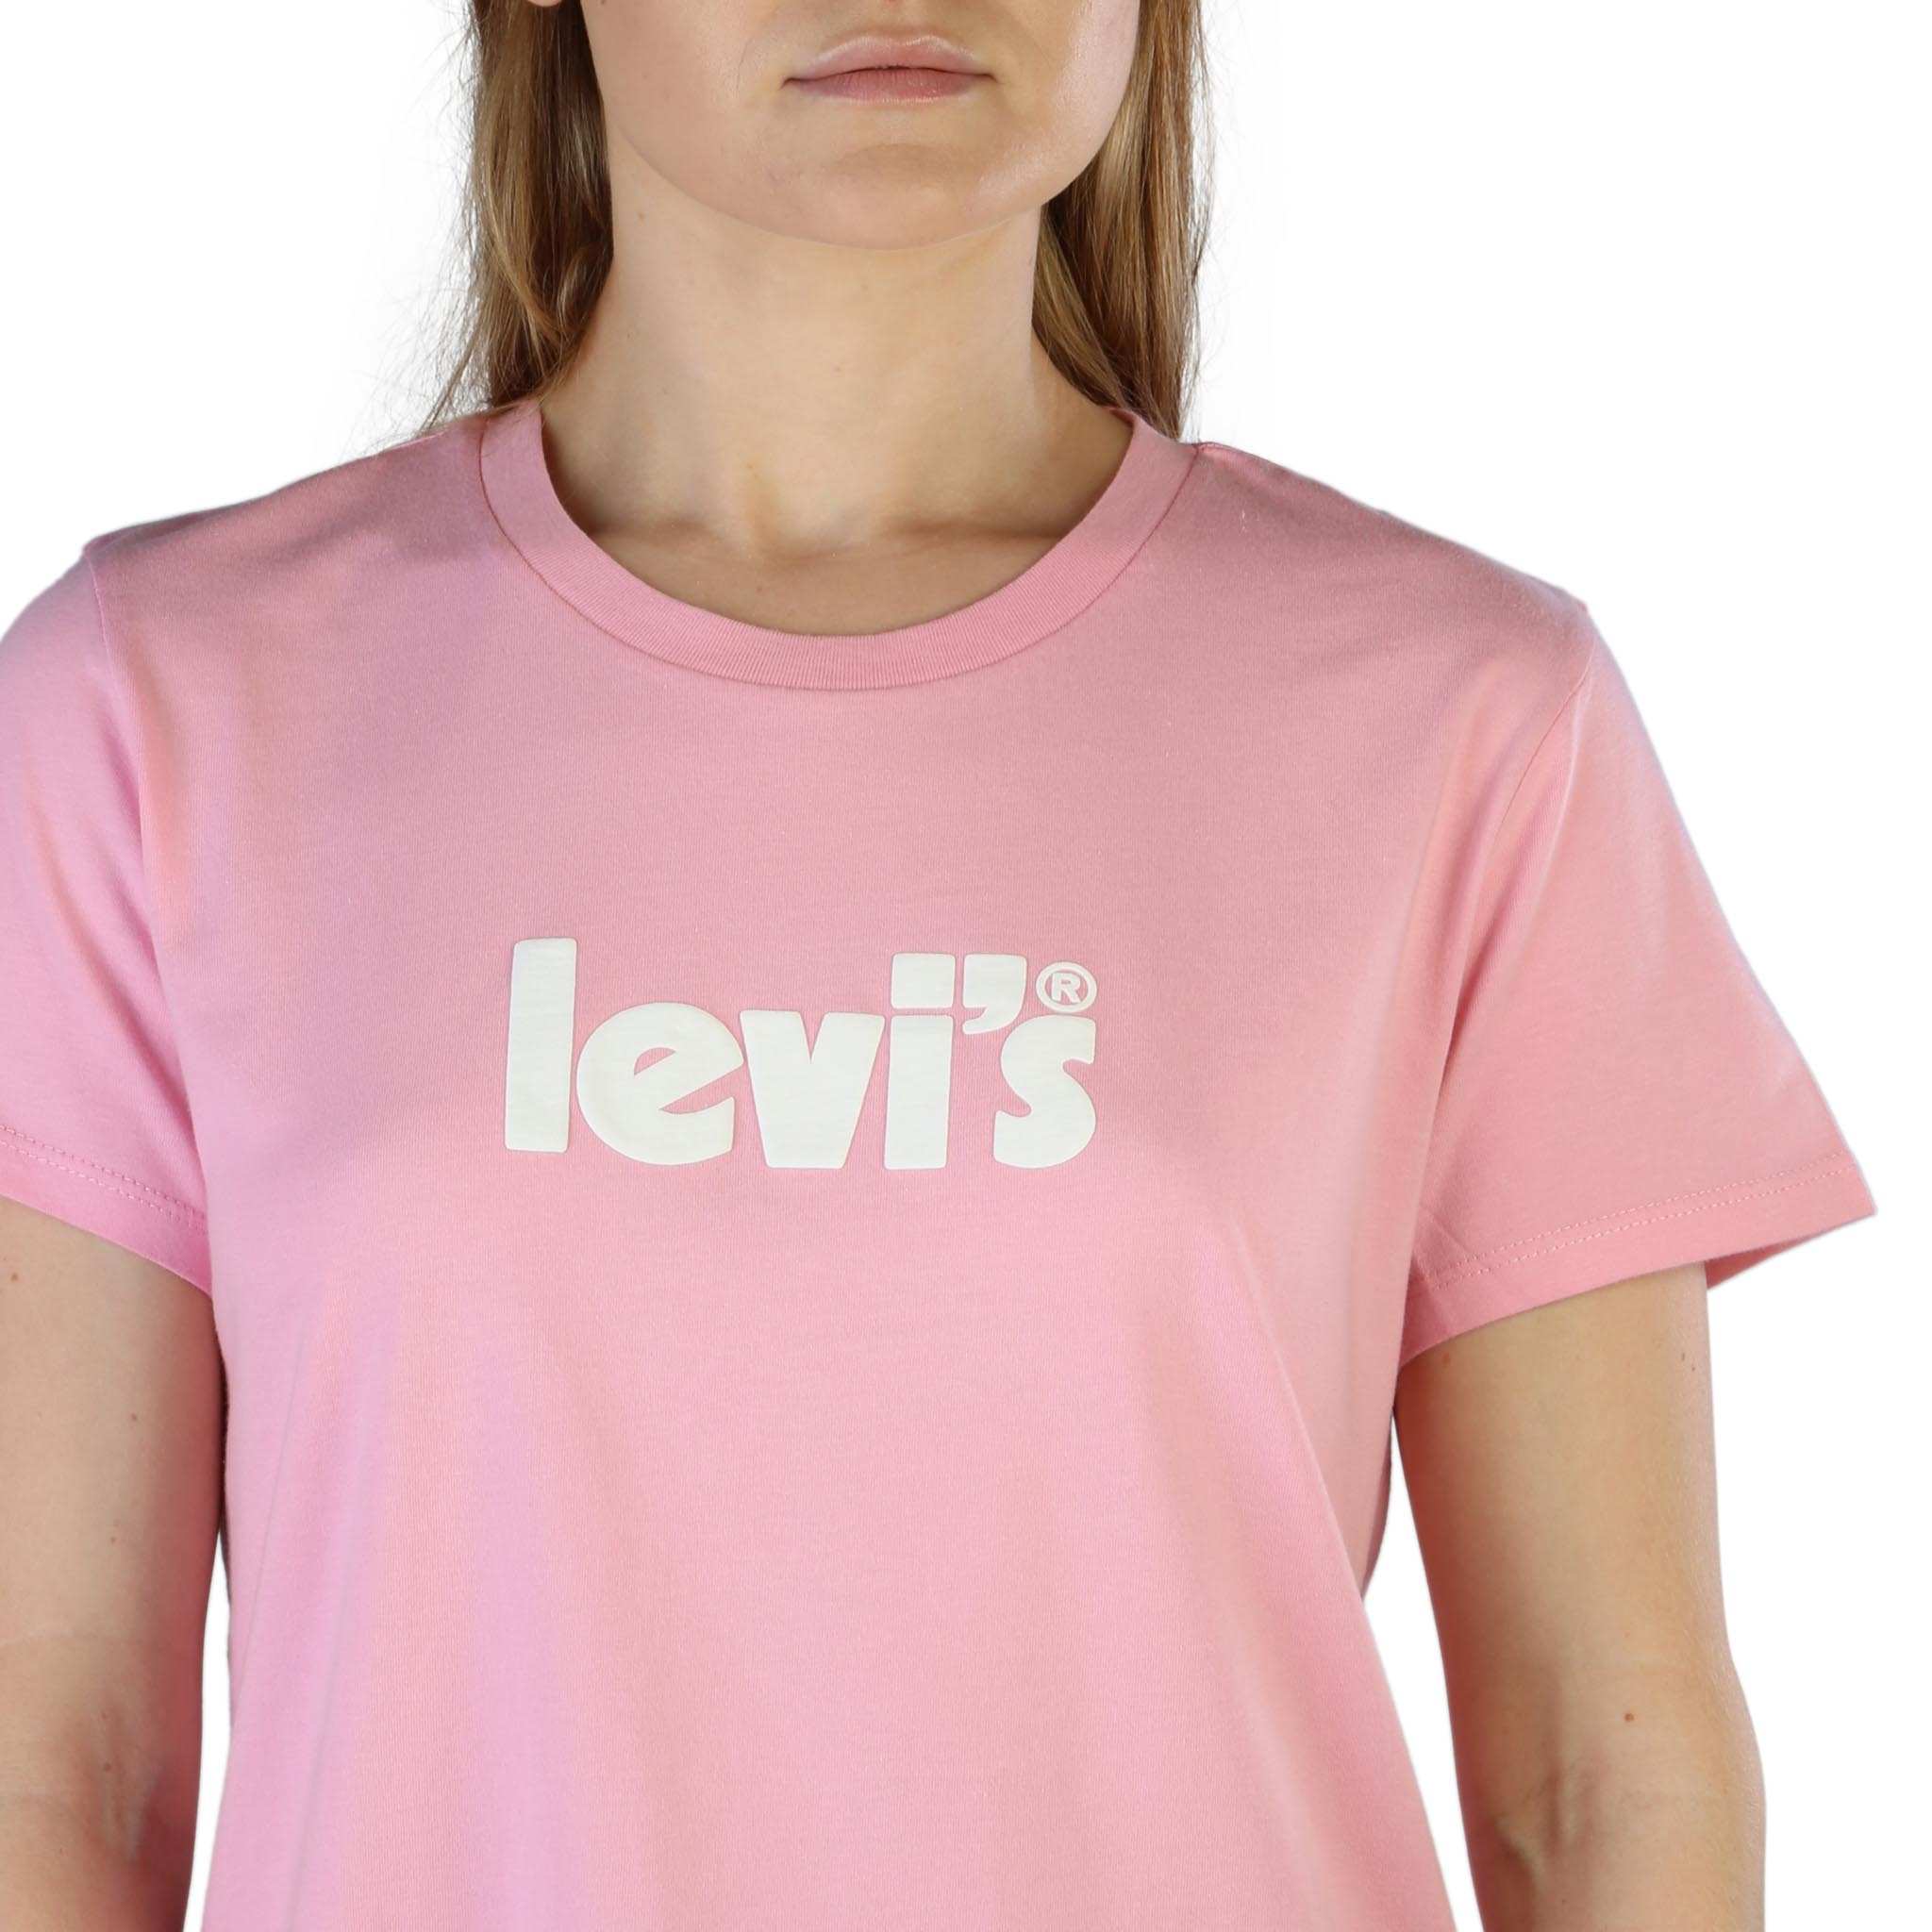 Levi's Pink T-shirts for Women - 17369_THE-PERFECT